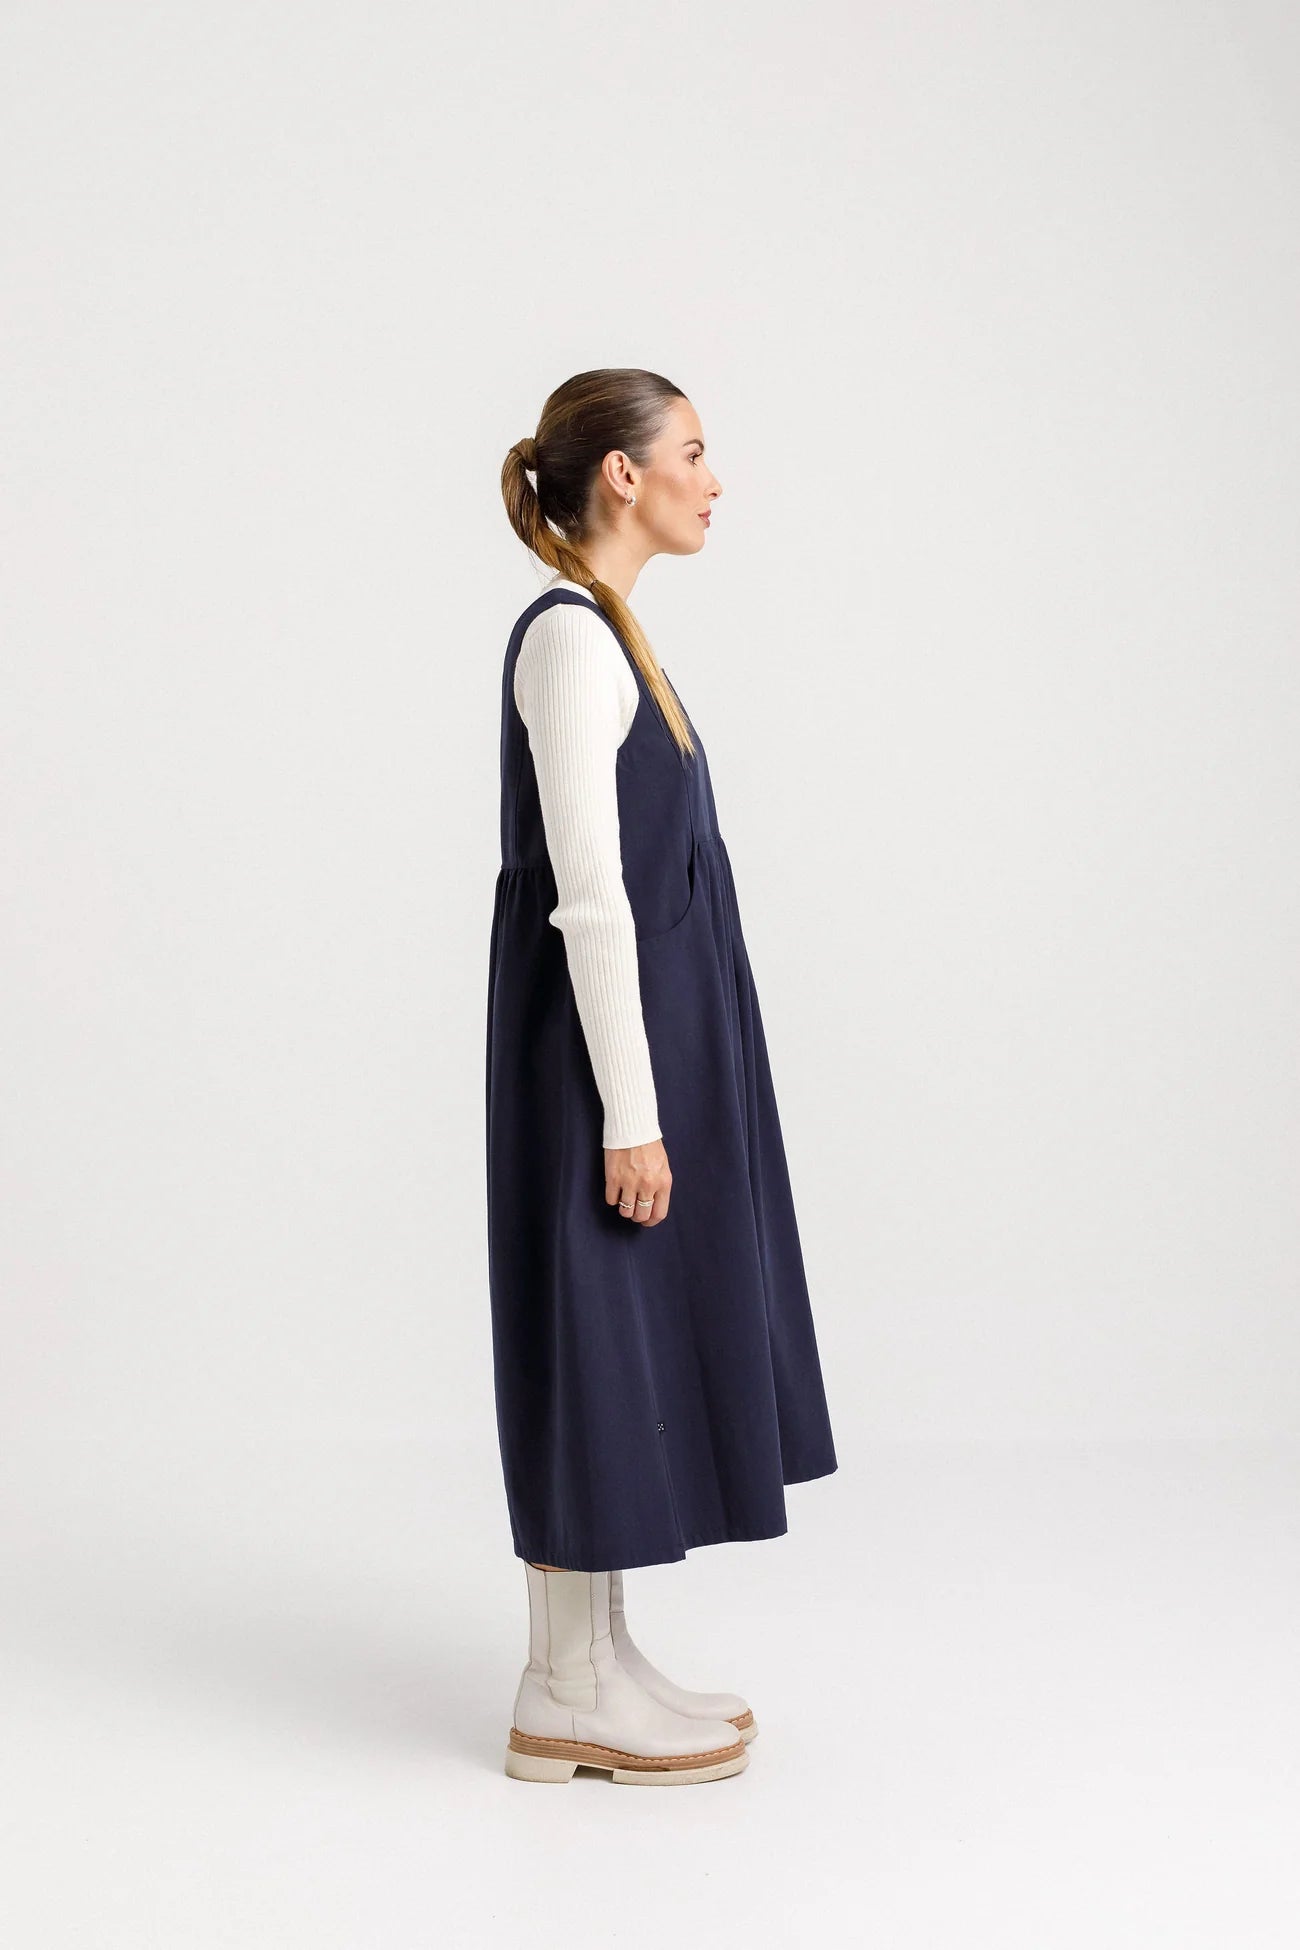 Thing Thing Easeful dress - Navy